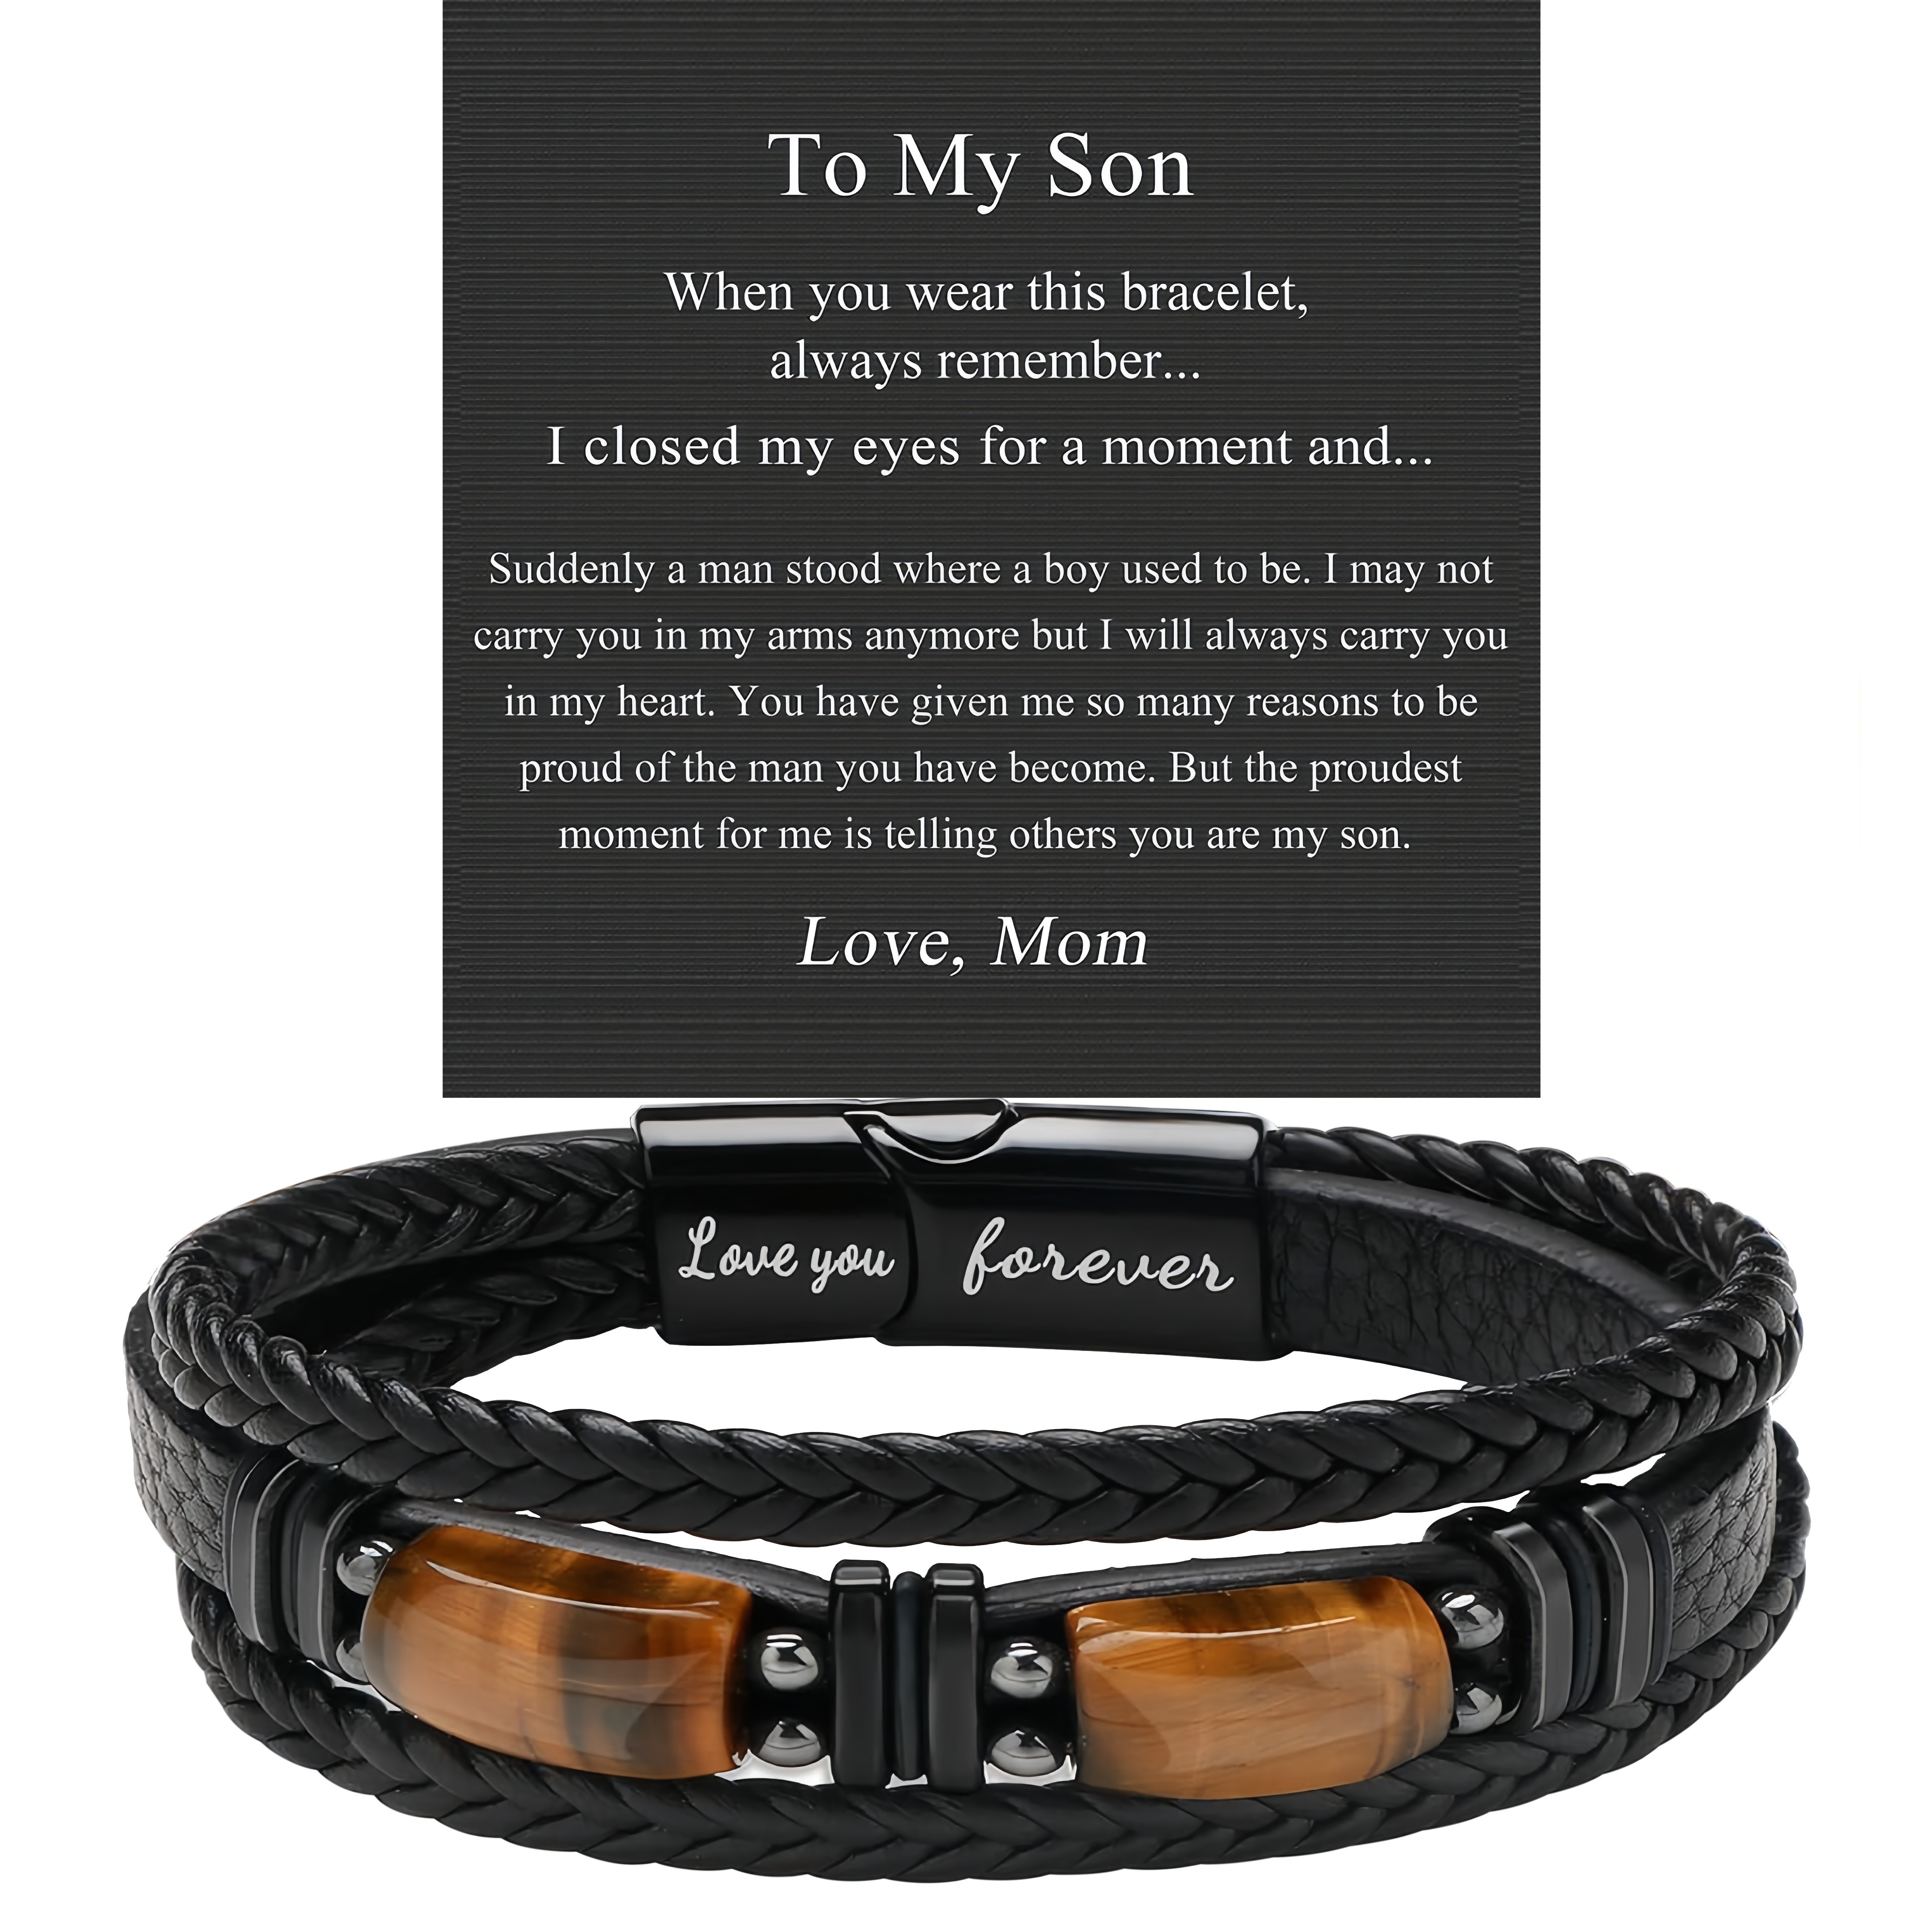 

Artificial Leather Natural Stone Bangle Bracelet Valentine's Day Gifts For Son With Blessing Card, I Love You Gifts For Son From Mom